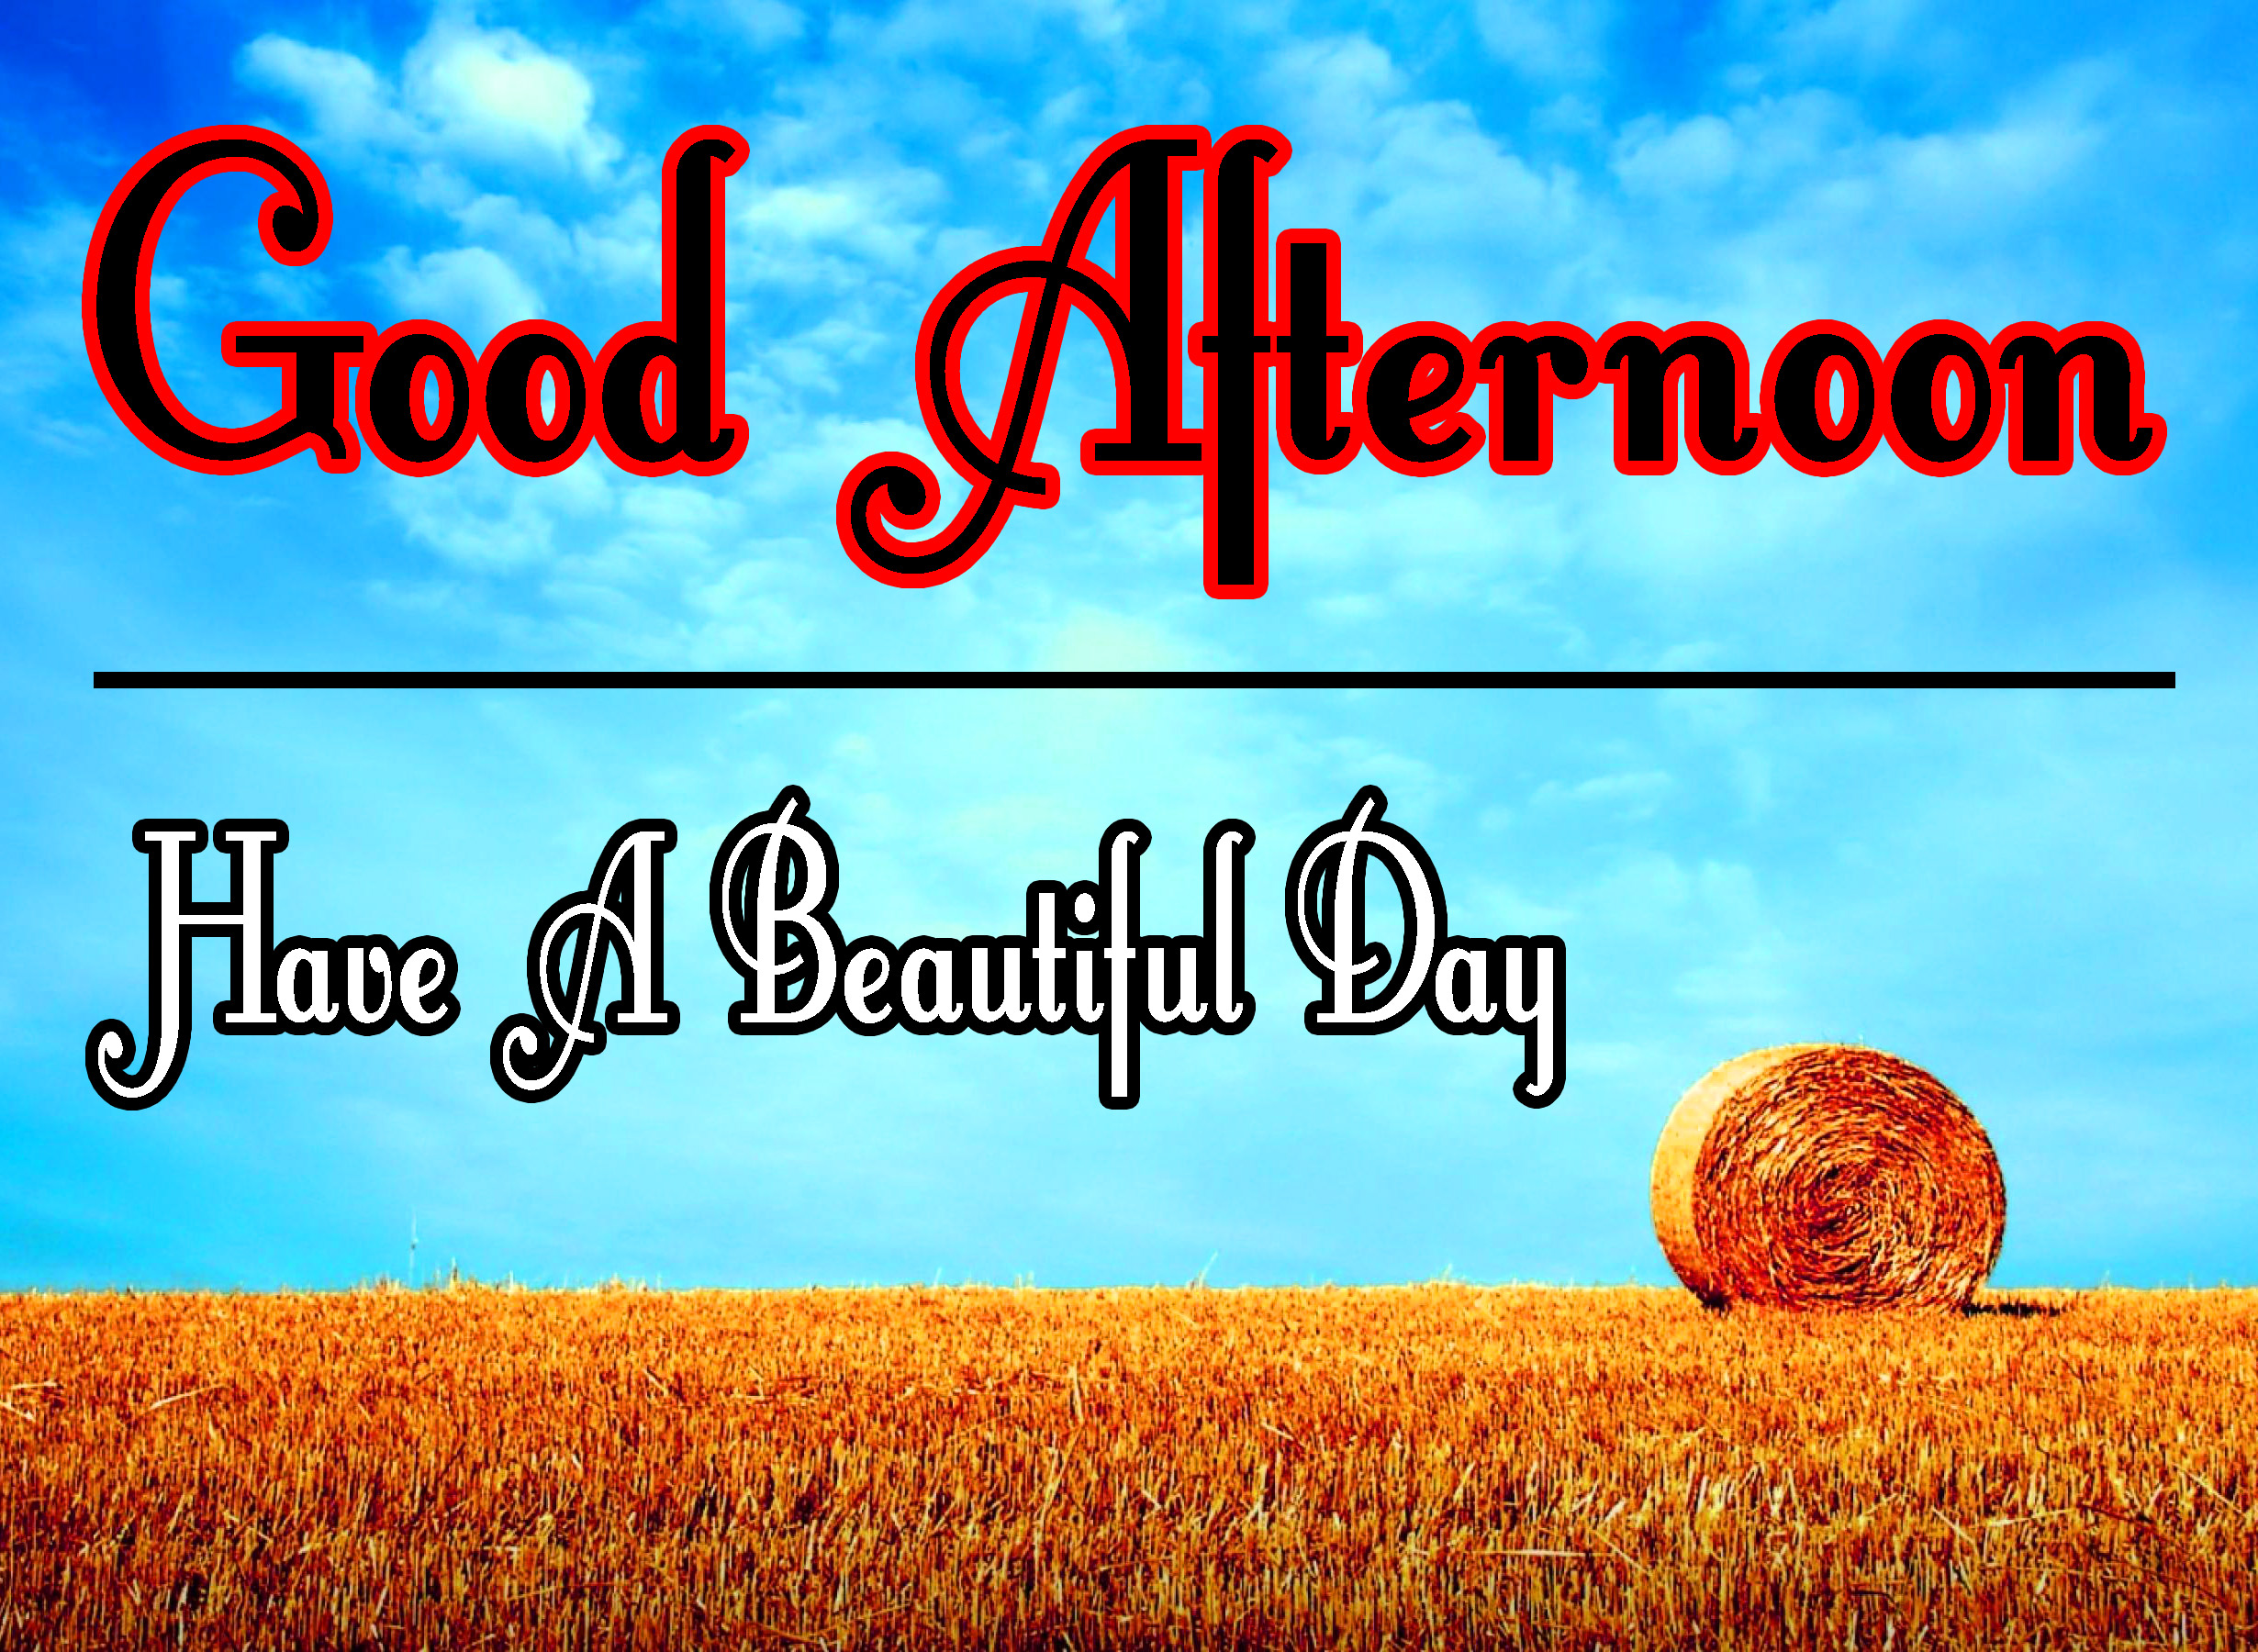 Free Beautiful Good Afternoon Images Wallpaper Download 